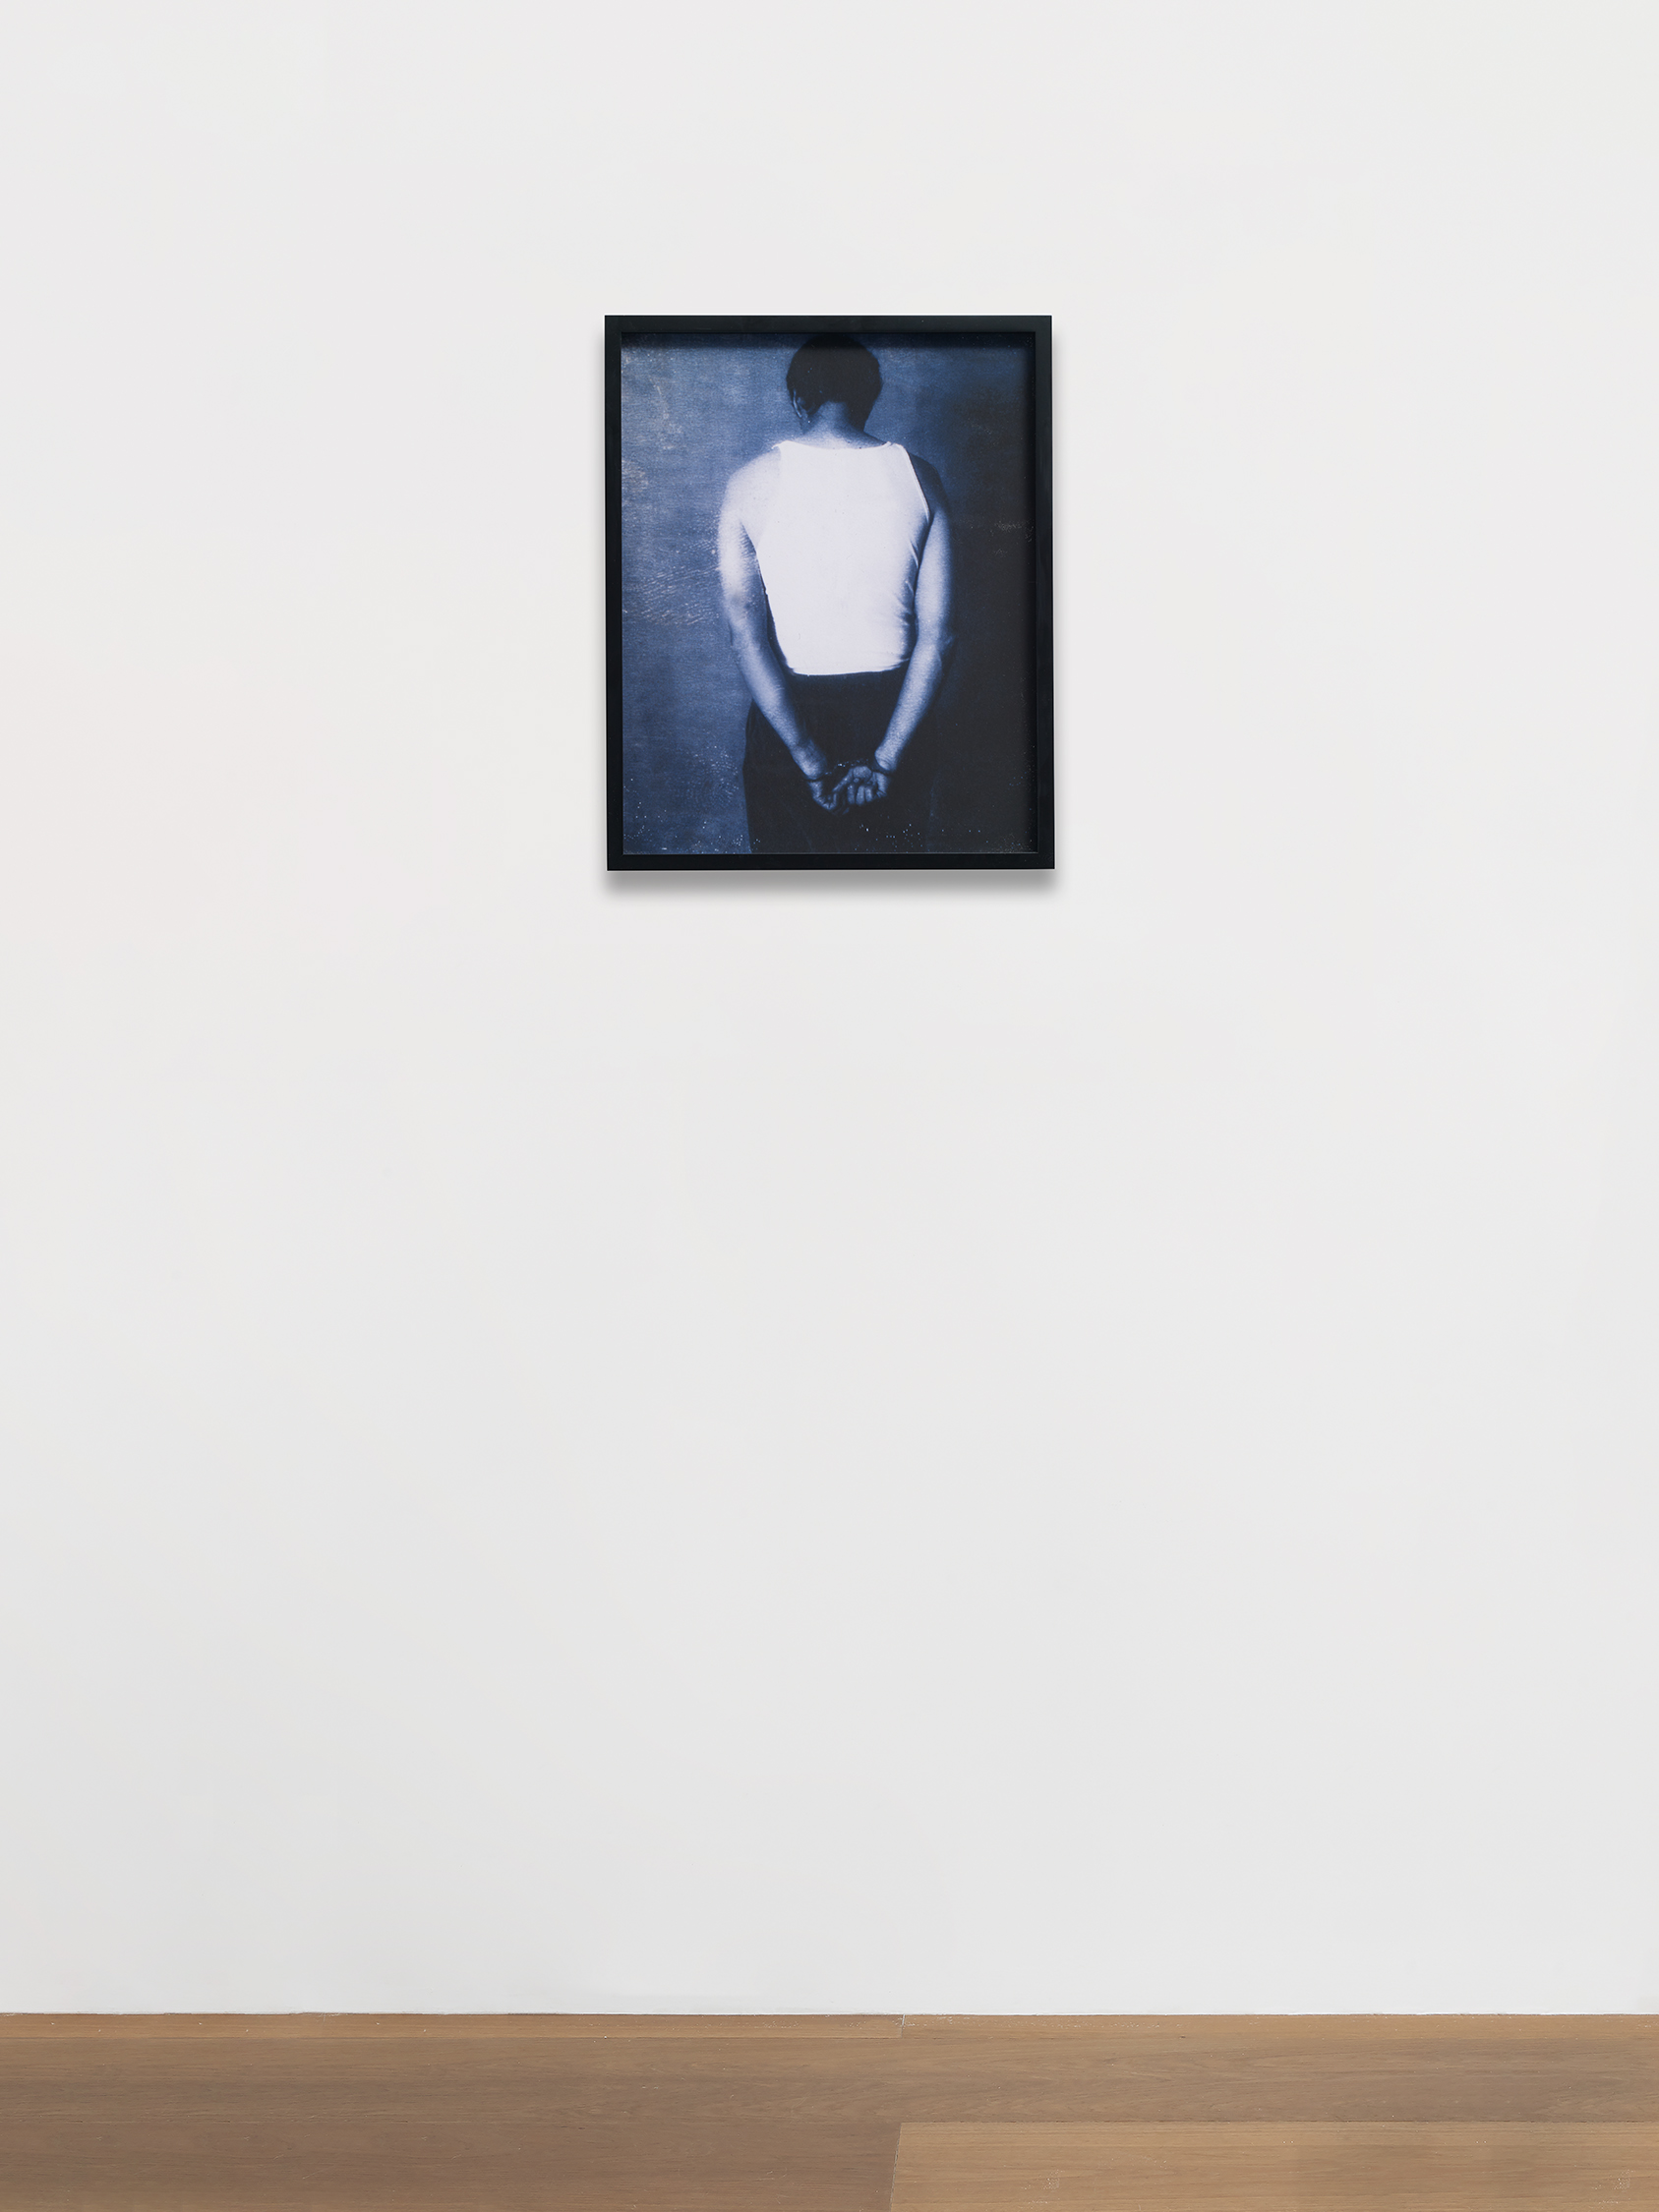 Image of Carrie Mae Weems' Cuffed See the Impossible, 1999-2021